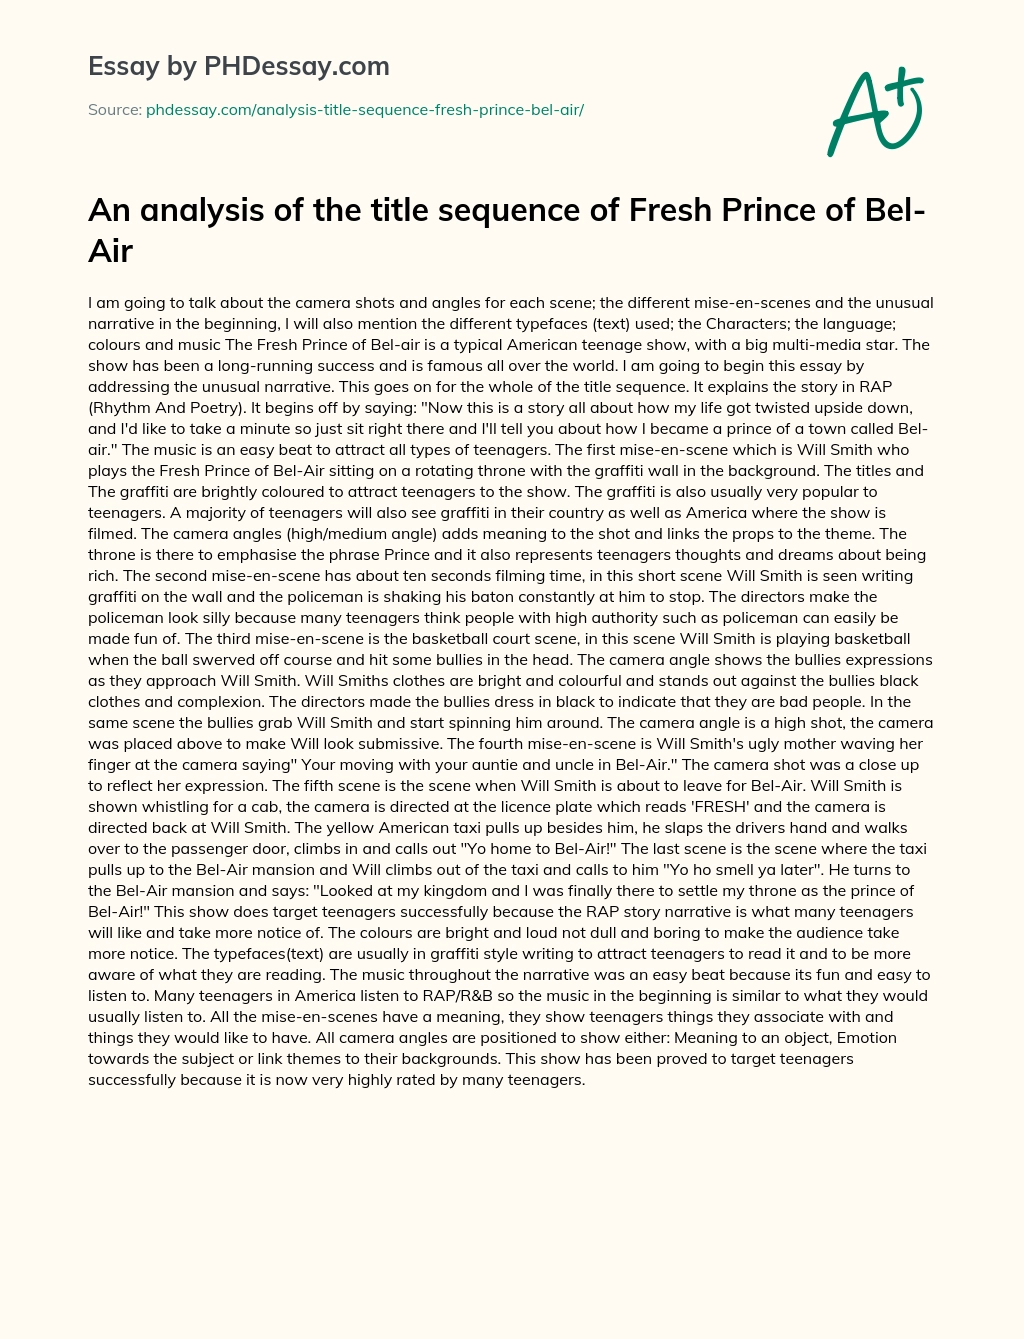 An analysis of the title sequence of Fresh Prince of Bel-Air essay